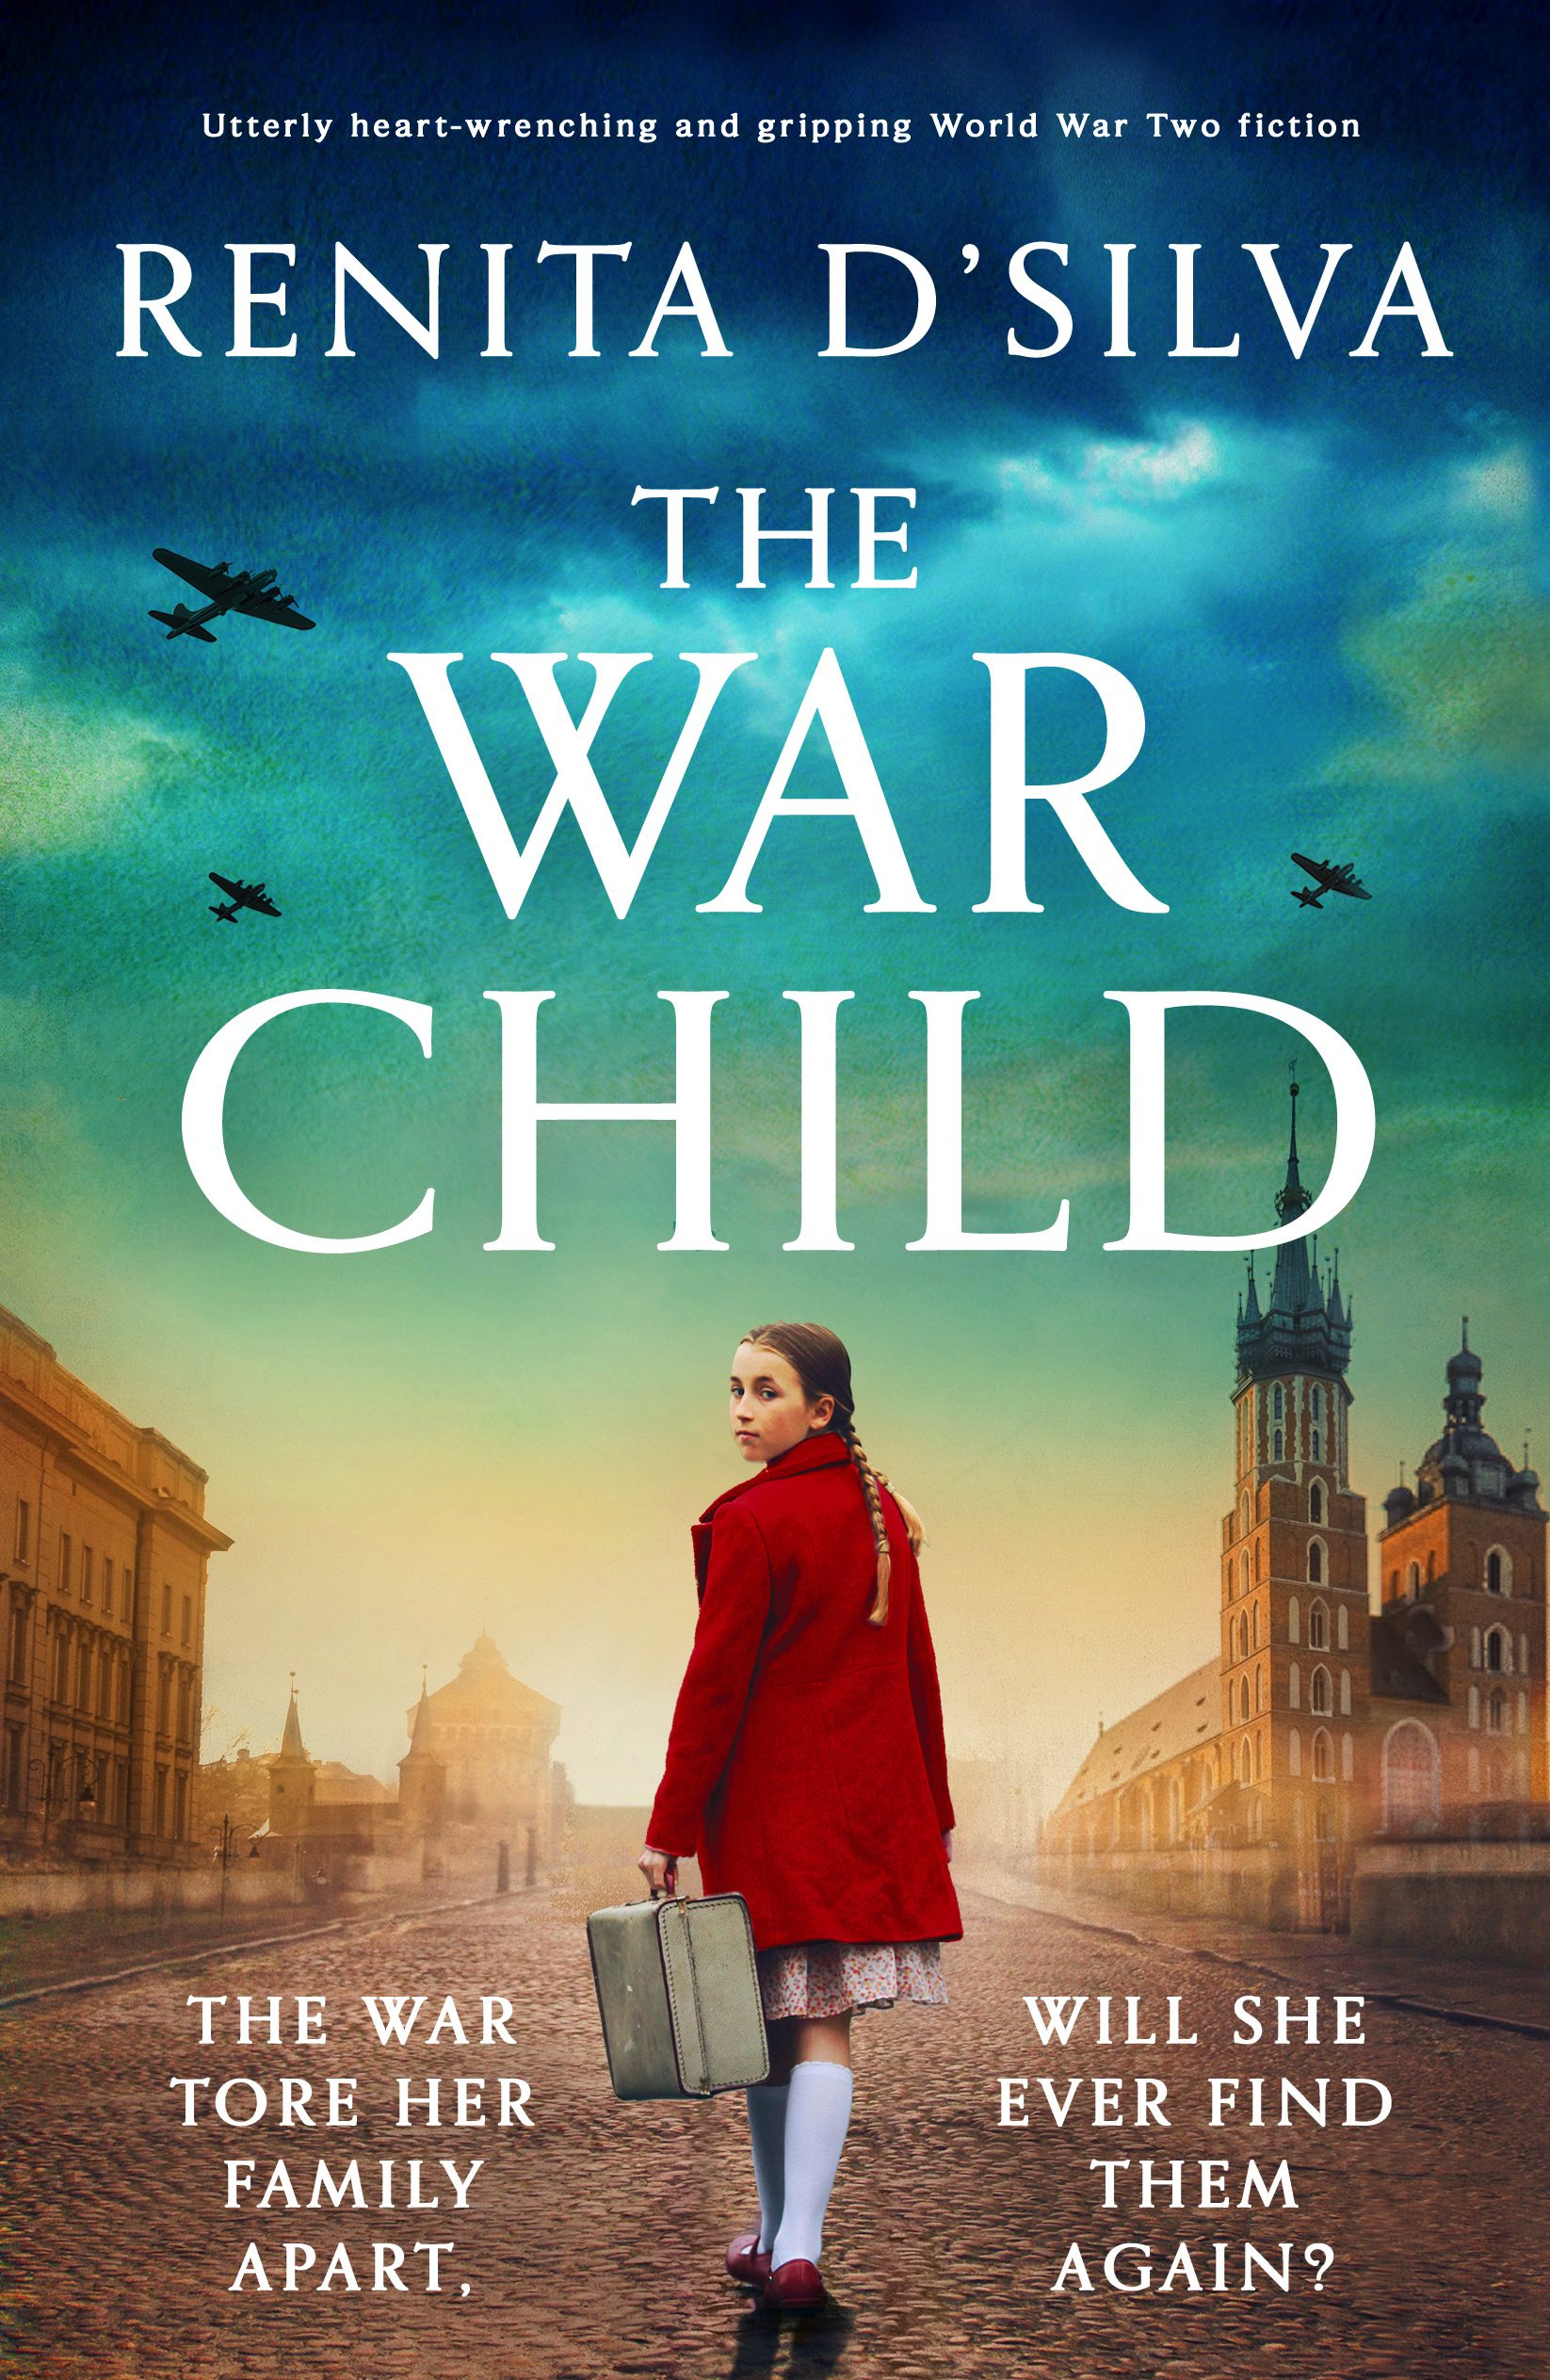 The War Child book cover